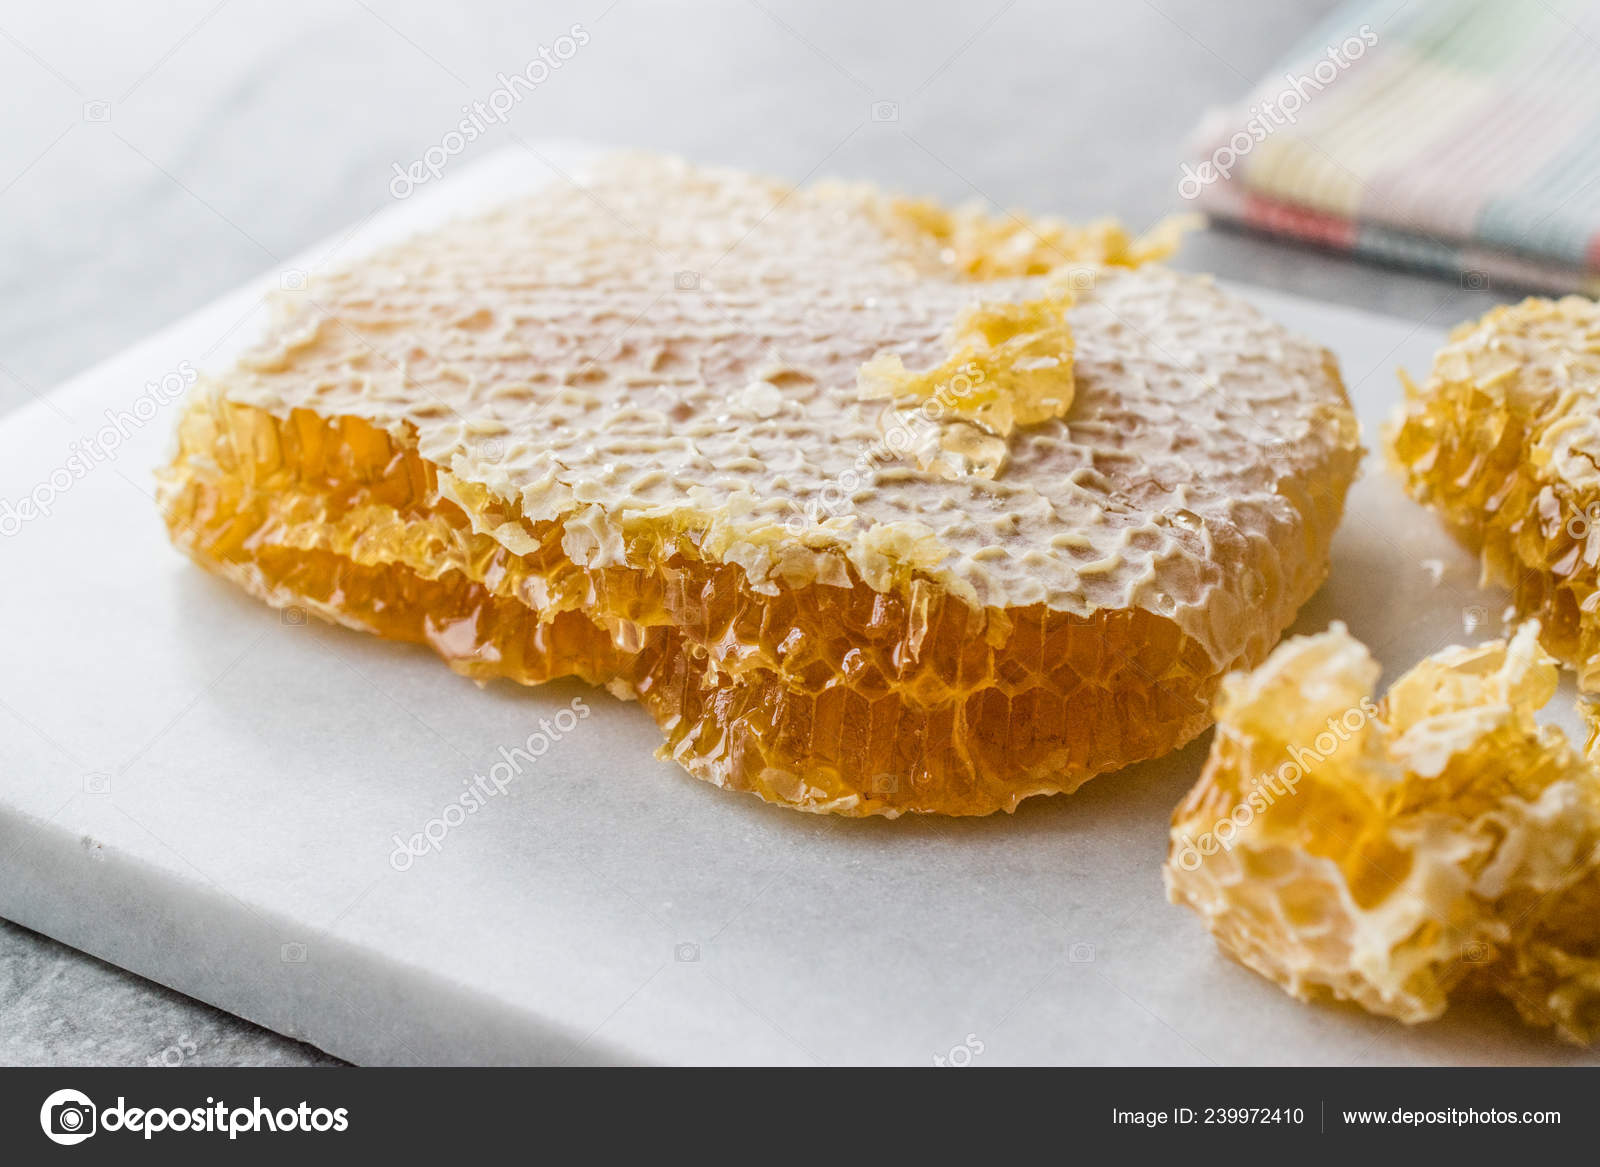 Can You Eat Beeswax? 